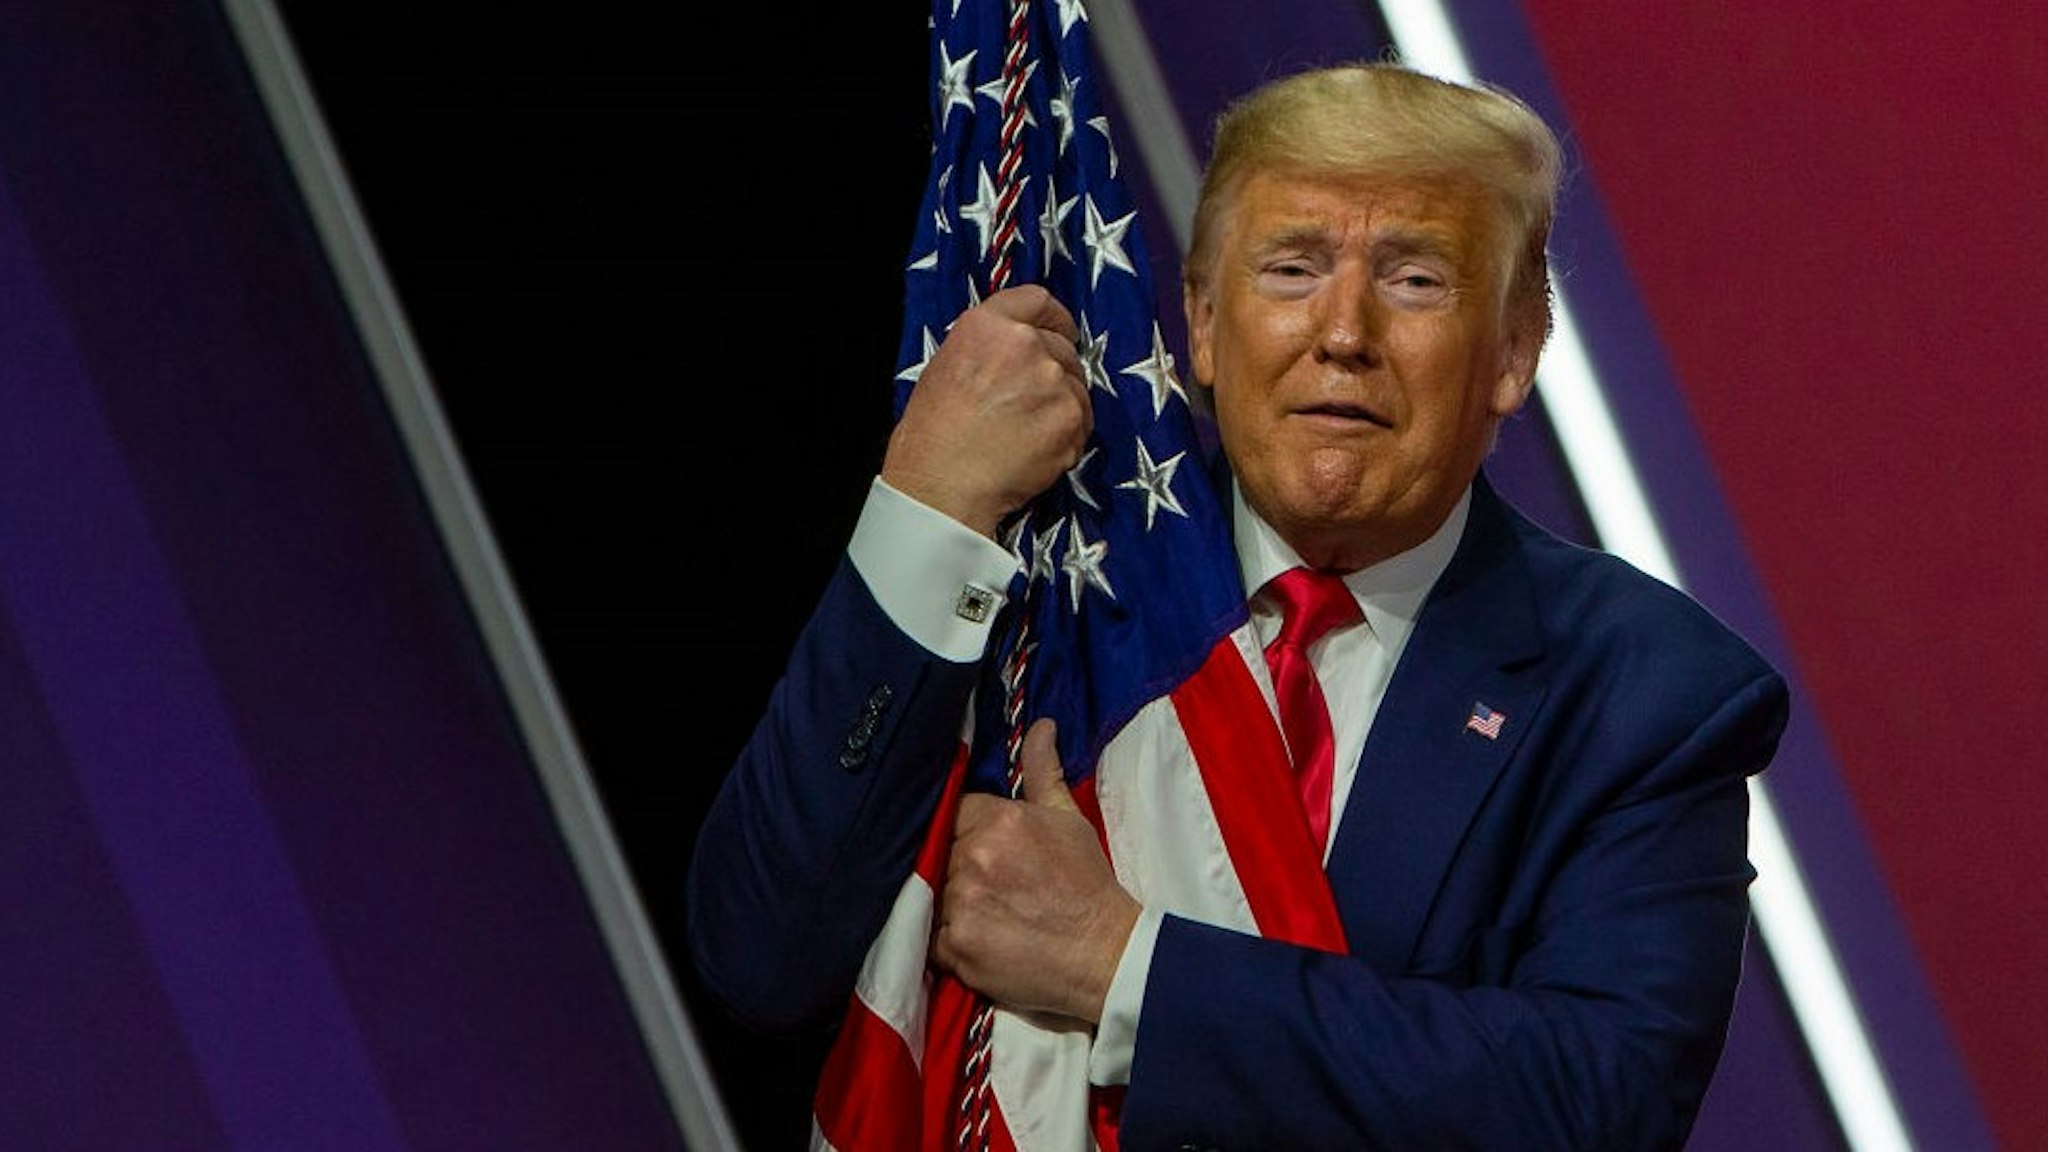 NATIONAL HARBOR, MARYLAND - FEBRUARY 29: US President Donald Trump hugs the flag at the annual Conservative Political Action Conference (CPAC) at Gaylord National Resort &amp; Convention Center February 29, 2020 in National Harbor, Maryland. Conservatives gather at the annual event to discuss their agenda. (Photo by